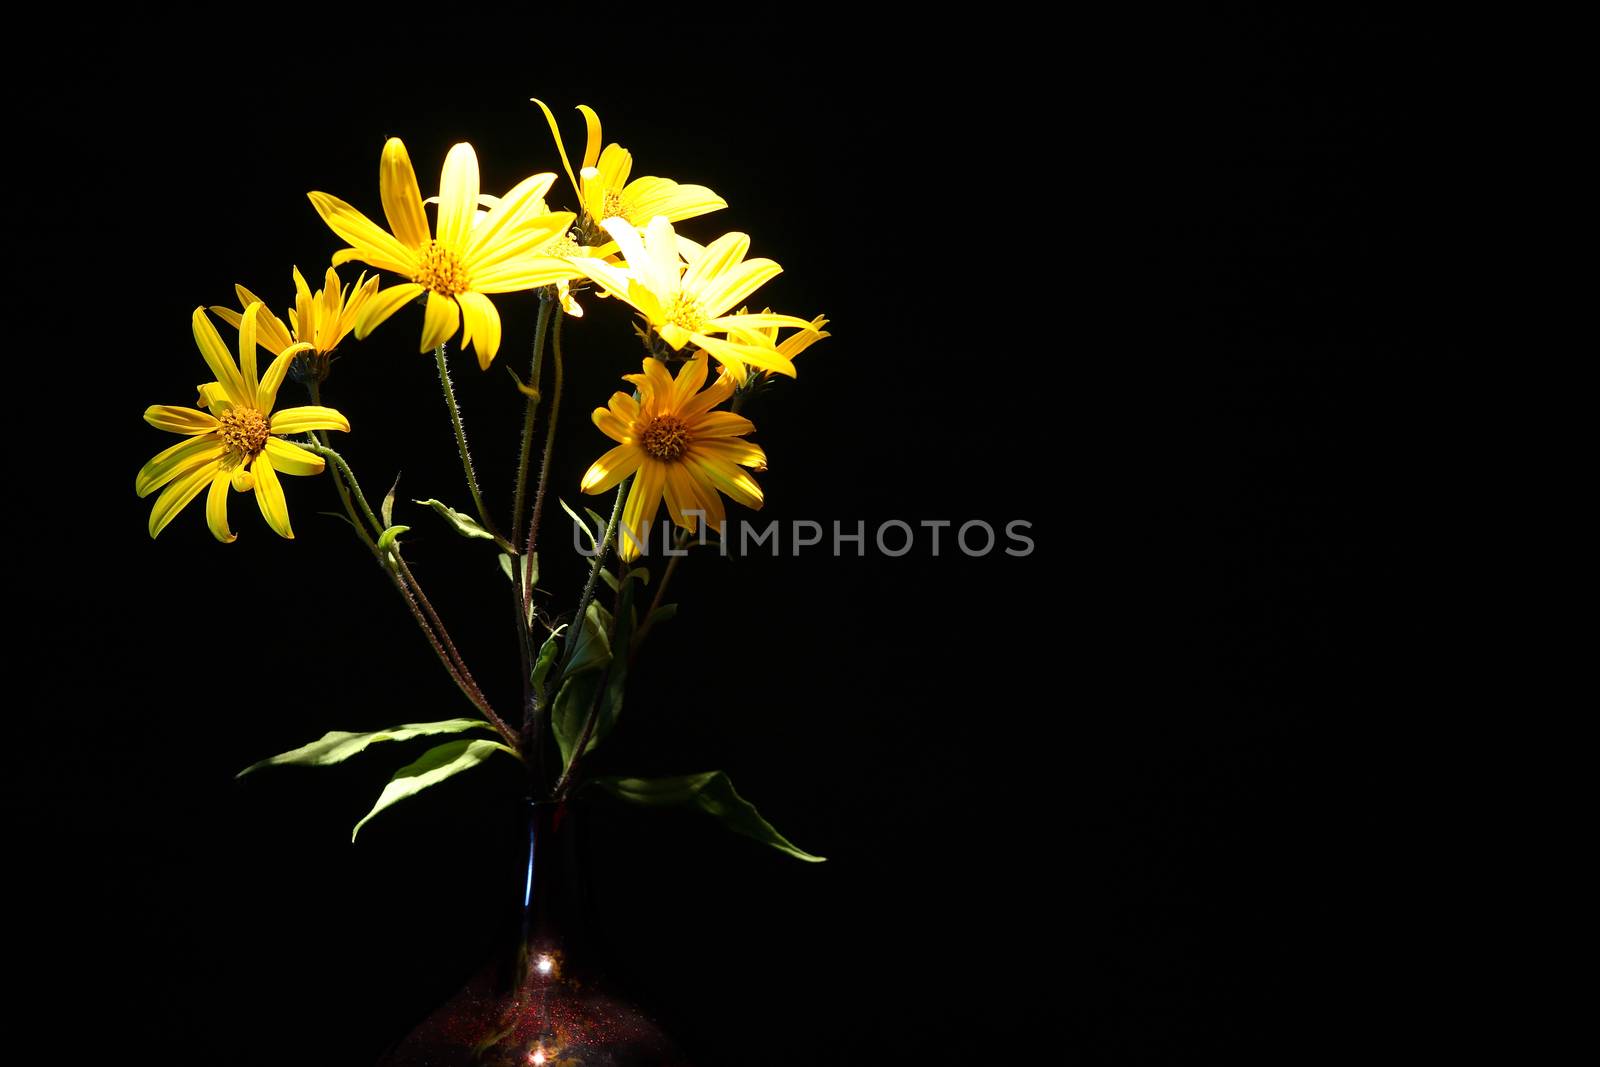 Nice yellow wildflowers in glass vase against black background